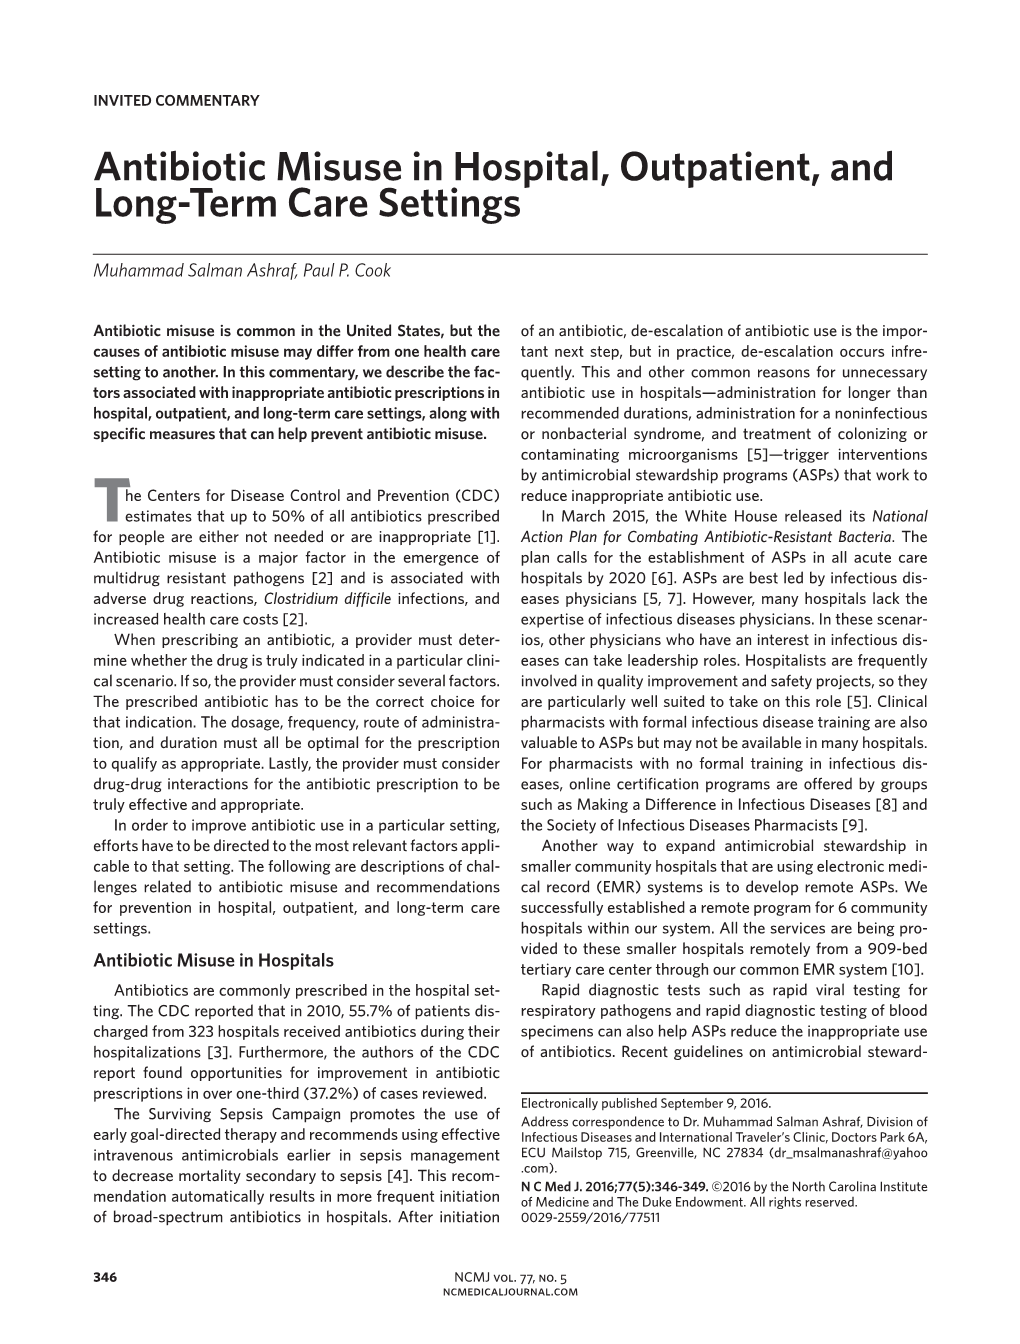 Antibiotic Misuse in Hospital, Outpatient, and Long-Term Care Settings